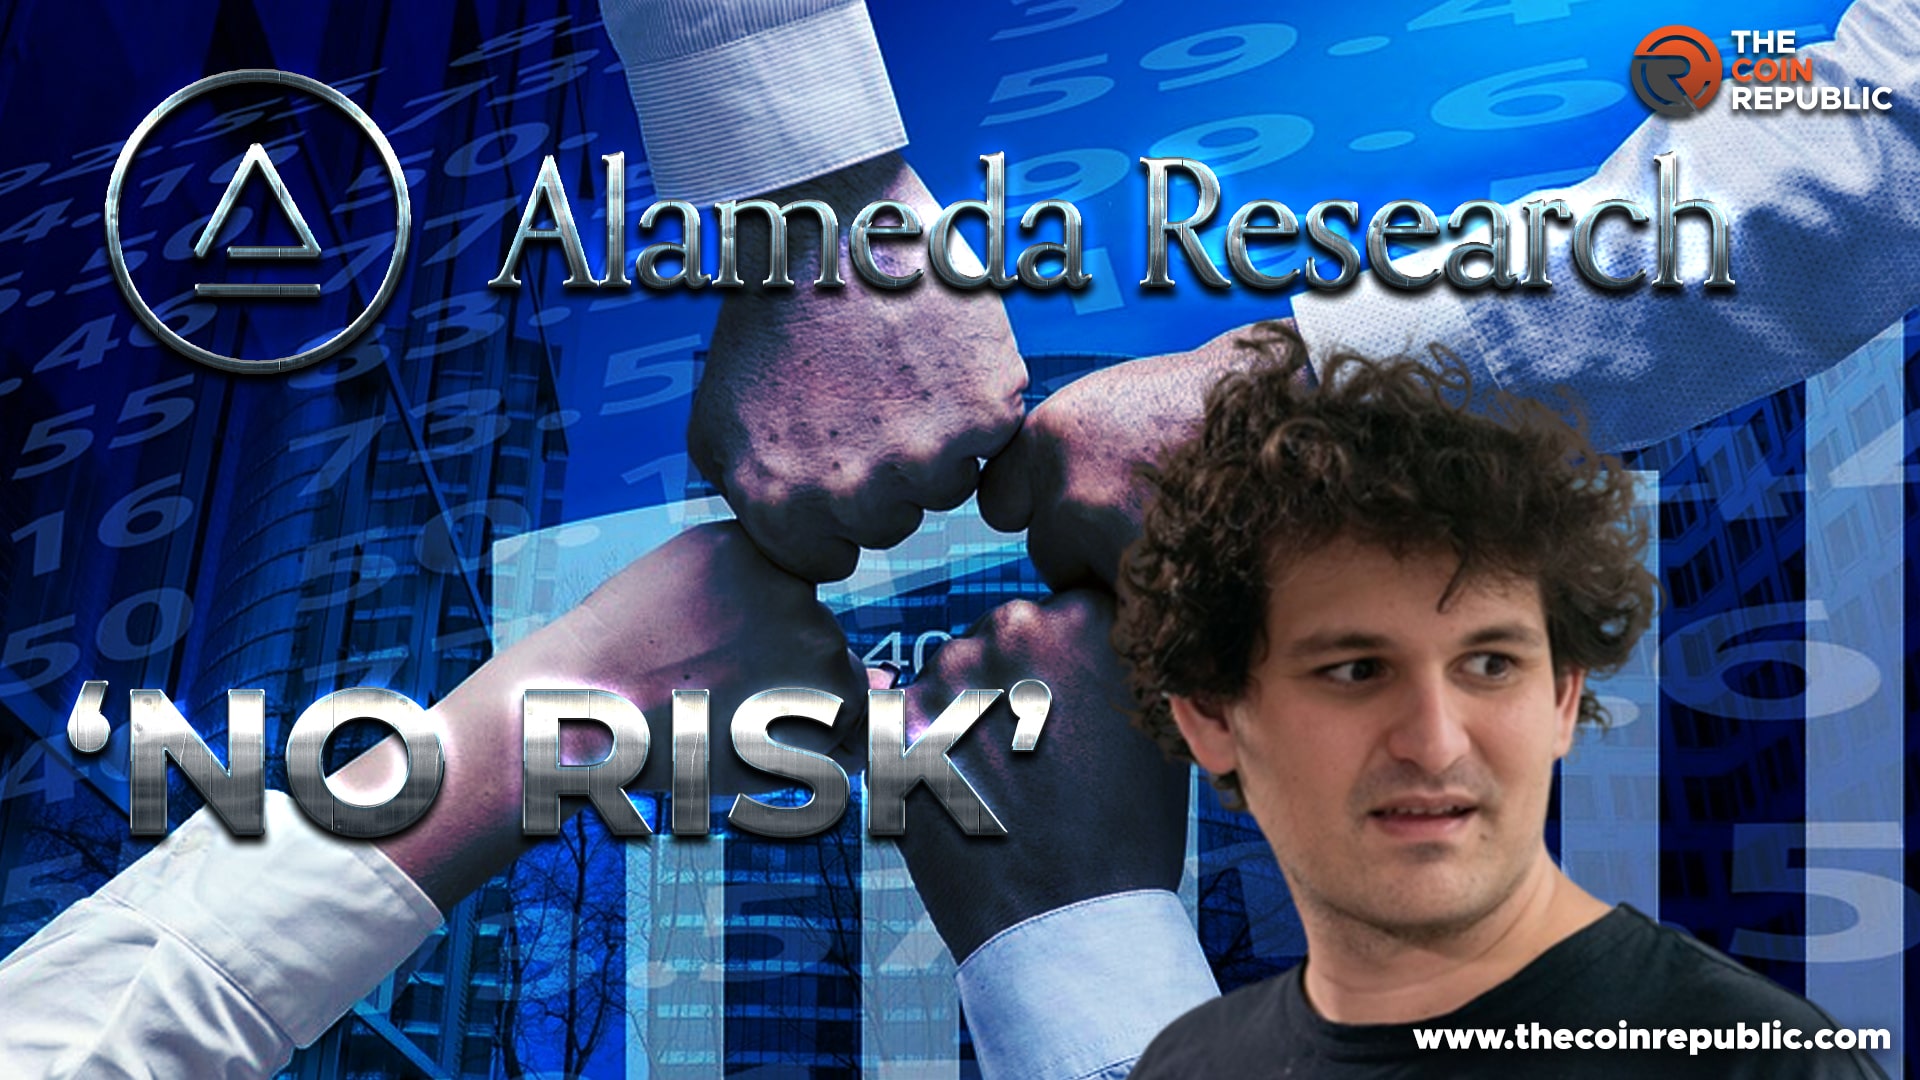 Alameda Research Should not Have Boast its Investment as “No Risk”: SBF